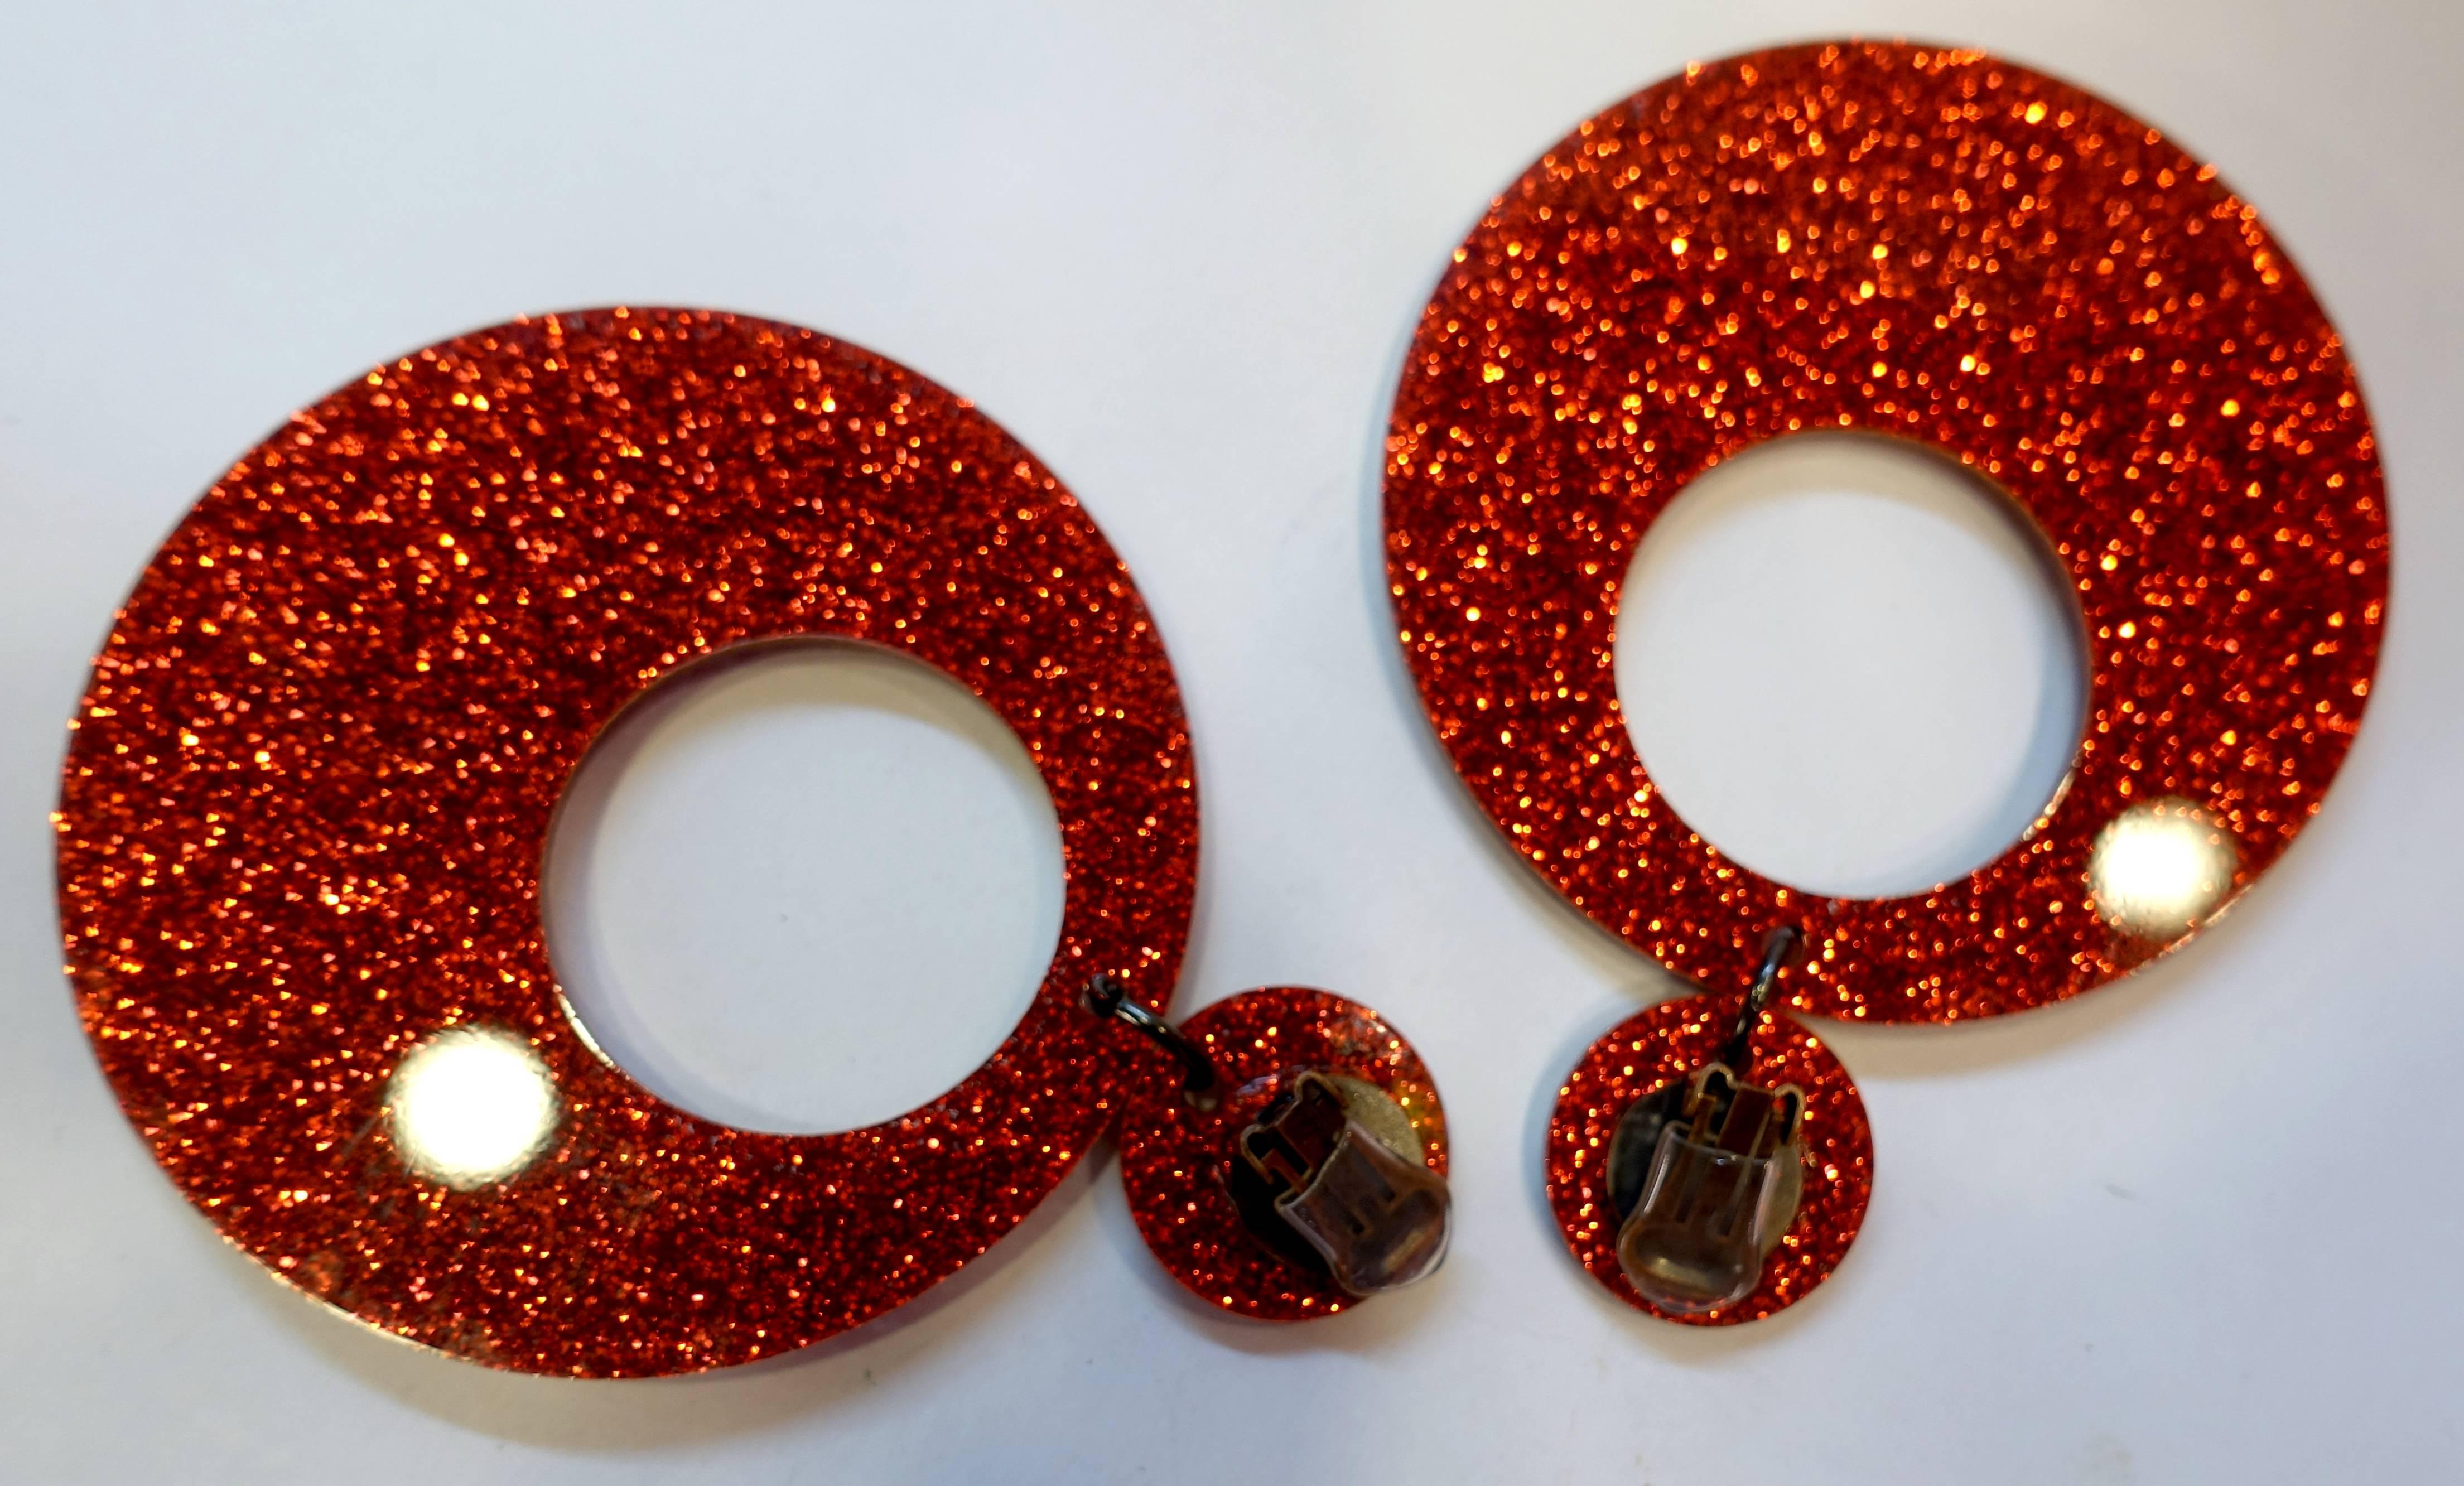 These clip earrings are so campy, I had to buy them.  They each have a red plastic iridescent round disk at the top that connects to a huge dangling red hoop at the bottom. They measure 4-1/8” long and 3-1/4” wide.  You’ll certainly be noticed in